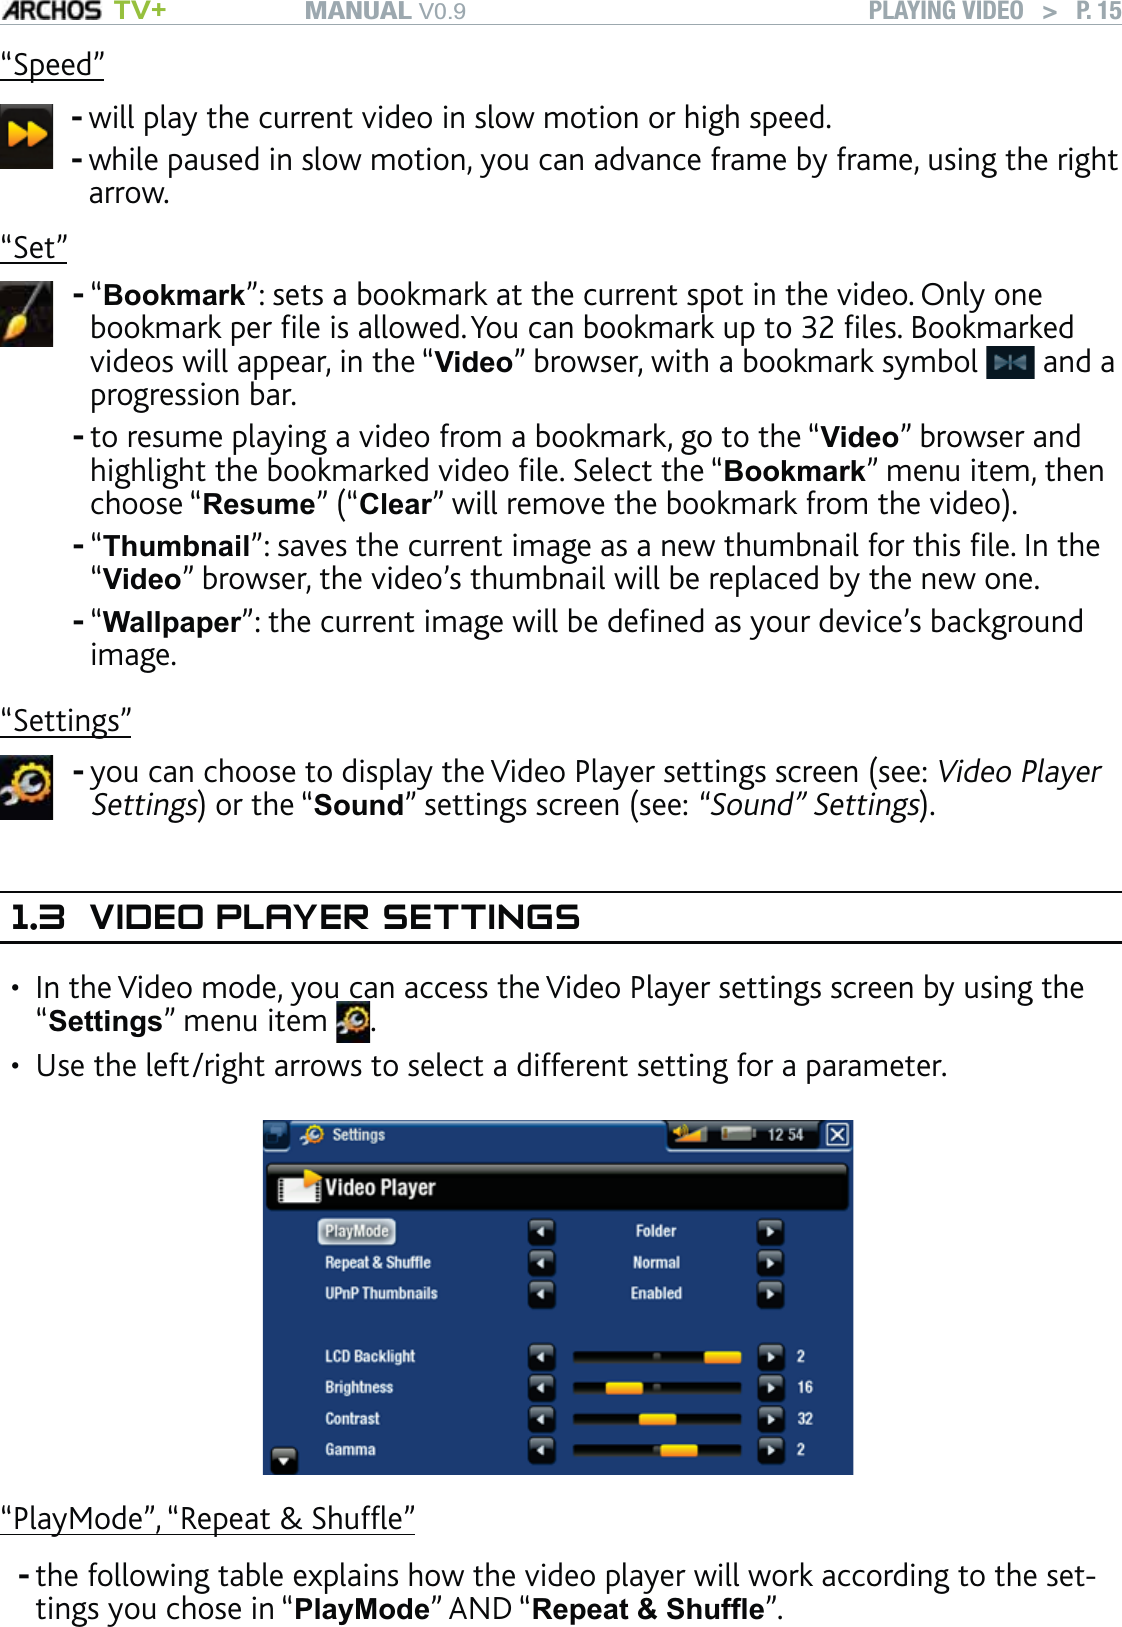 MANUAL V0.9 TV+ PLAYING VIDEO   &gt;   P. 15“Speed”will play the current video in slow motion or high speed.while paused in slow motion, you can advance frame by frame, using the right arrow. --“Set”“Bookmark”: sets a bookmark at the current spot in the video. Only one bookmark per ﬁle is allowed. You can bookmark up to 32 ﬁles. Bookmarked videos will appear, in the “Video” browser, with a bookmark symbol   and a progression bar.to resume playing a video from a bookmark, go to the “Video” browser and highlight the bookmarked video ﬁle. Select the “Bookmark” menu item, then choose “Resume” (“Clear” will remove the bookmark from the video).“Thumbnail”: saves the current image as a new thumbnail for this ﬁle. In the “Video” browser, the video’s thumbnail will be replaced by the new one.“Wallpaper”: the current image will be deﬁned as your device’s background image.----“Settings”you can choose to display the Video Player settings screen (see: Video Player Settings) or the “Sound” settings screen (see: “Sound” Settings).-1.3  VIDEO PLAYER SETTINGSIn the Video mode, you can access the Video Player settings screen by using the “Settings” menu item  . Use the left/right arrows to select a different setting for a parameter.“PlayMode”, “Repeat &amp; Shufﬂe”the following table explains how the video player will work according to the set-tings you chose in “PlayMode” AND “Repeat &amp; Shufﬂe”. ••-